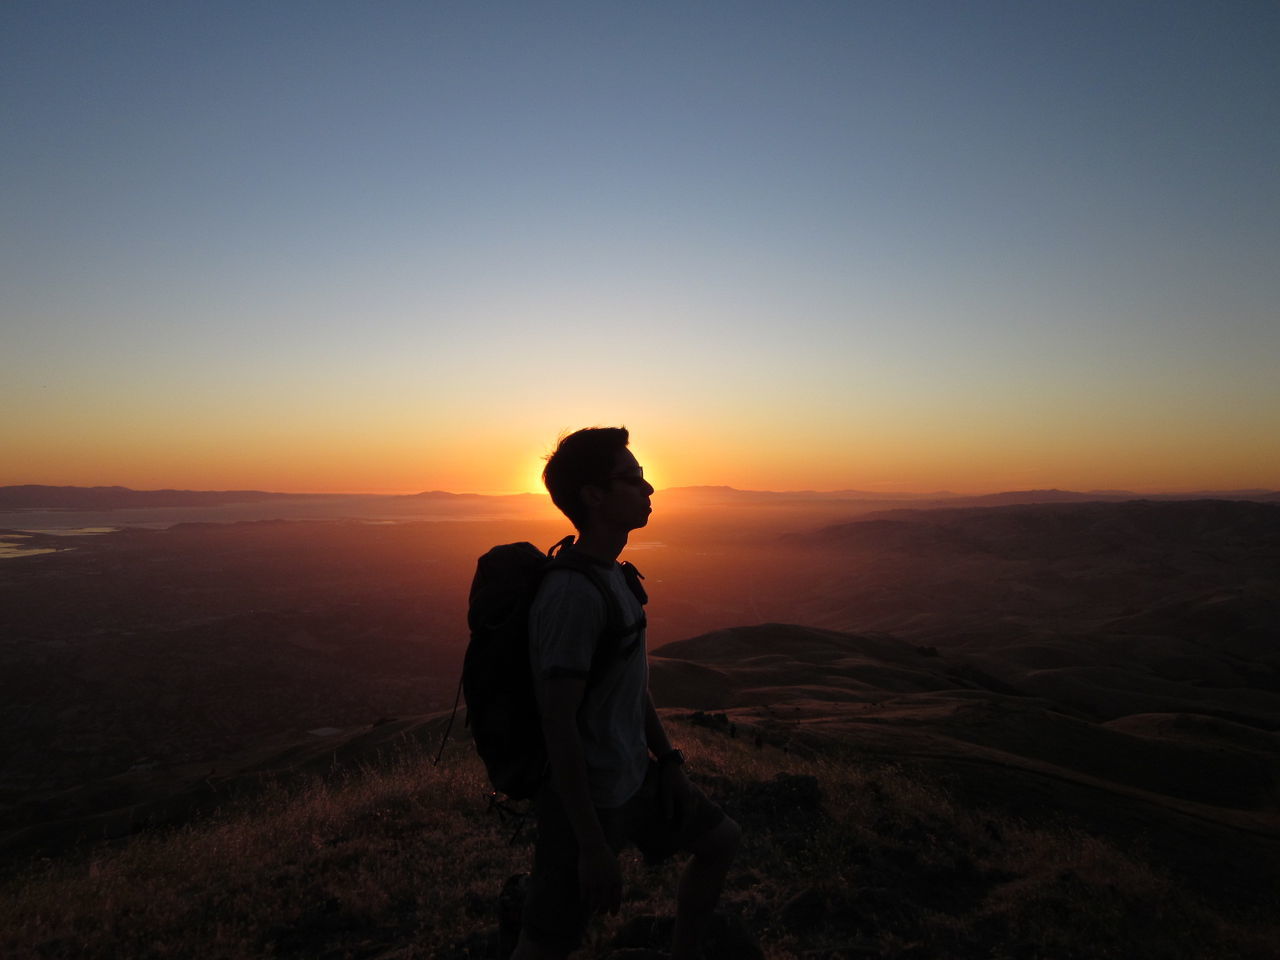 Silhouette of man standing on landscape at sunset